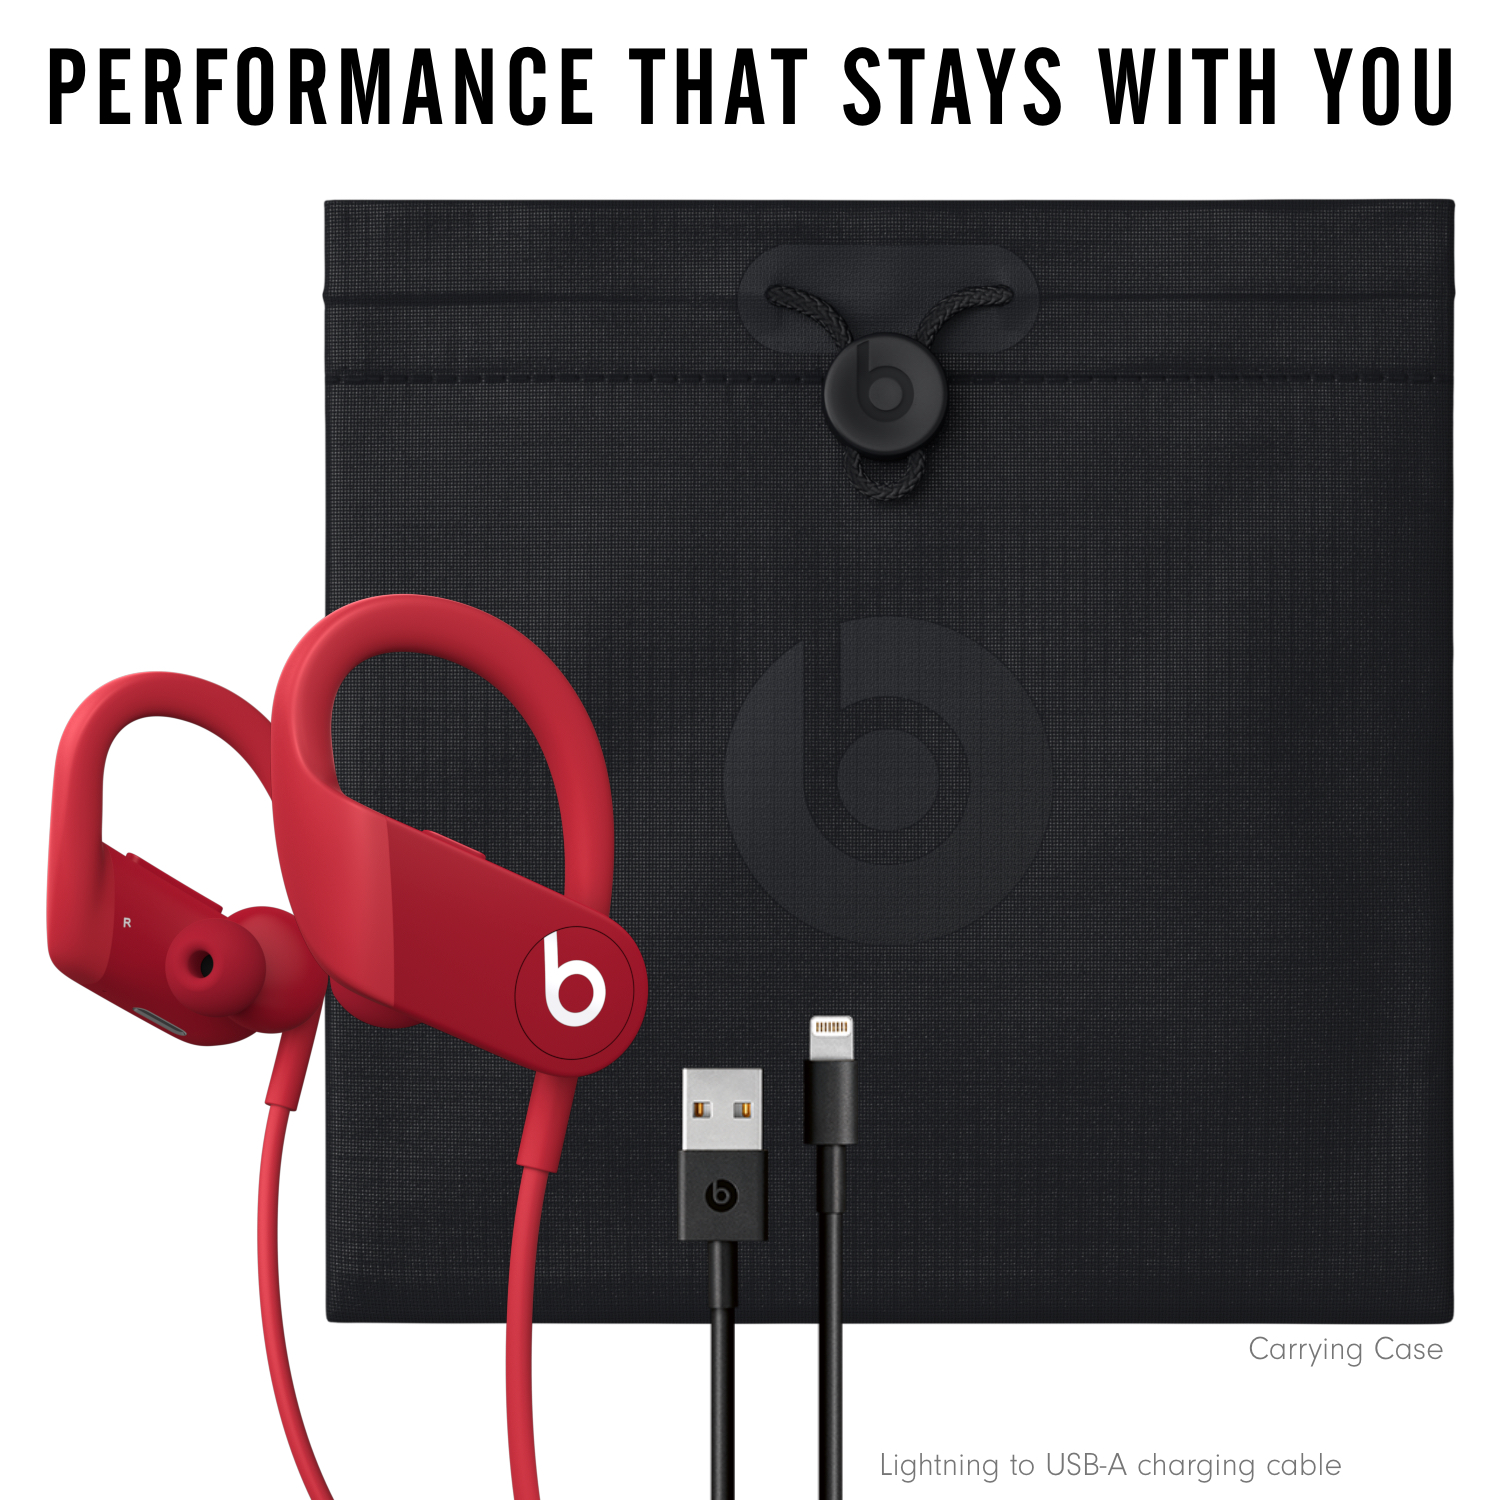 Powerbeats High-Performance Wireless Earphones with Apple H1 Headphone Chip - Red - image 11 of 11